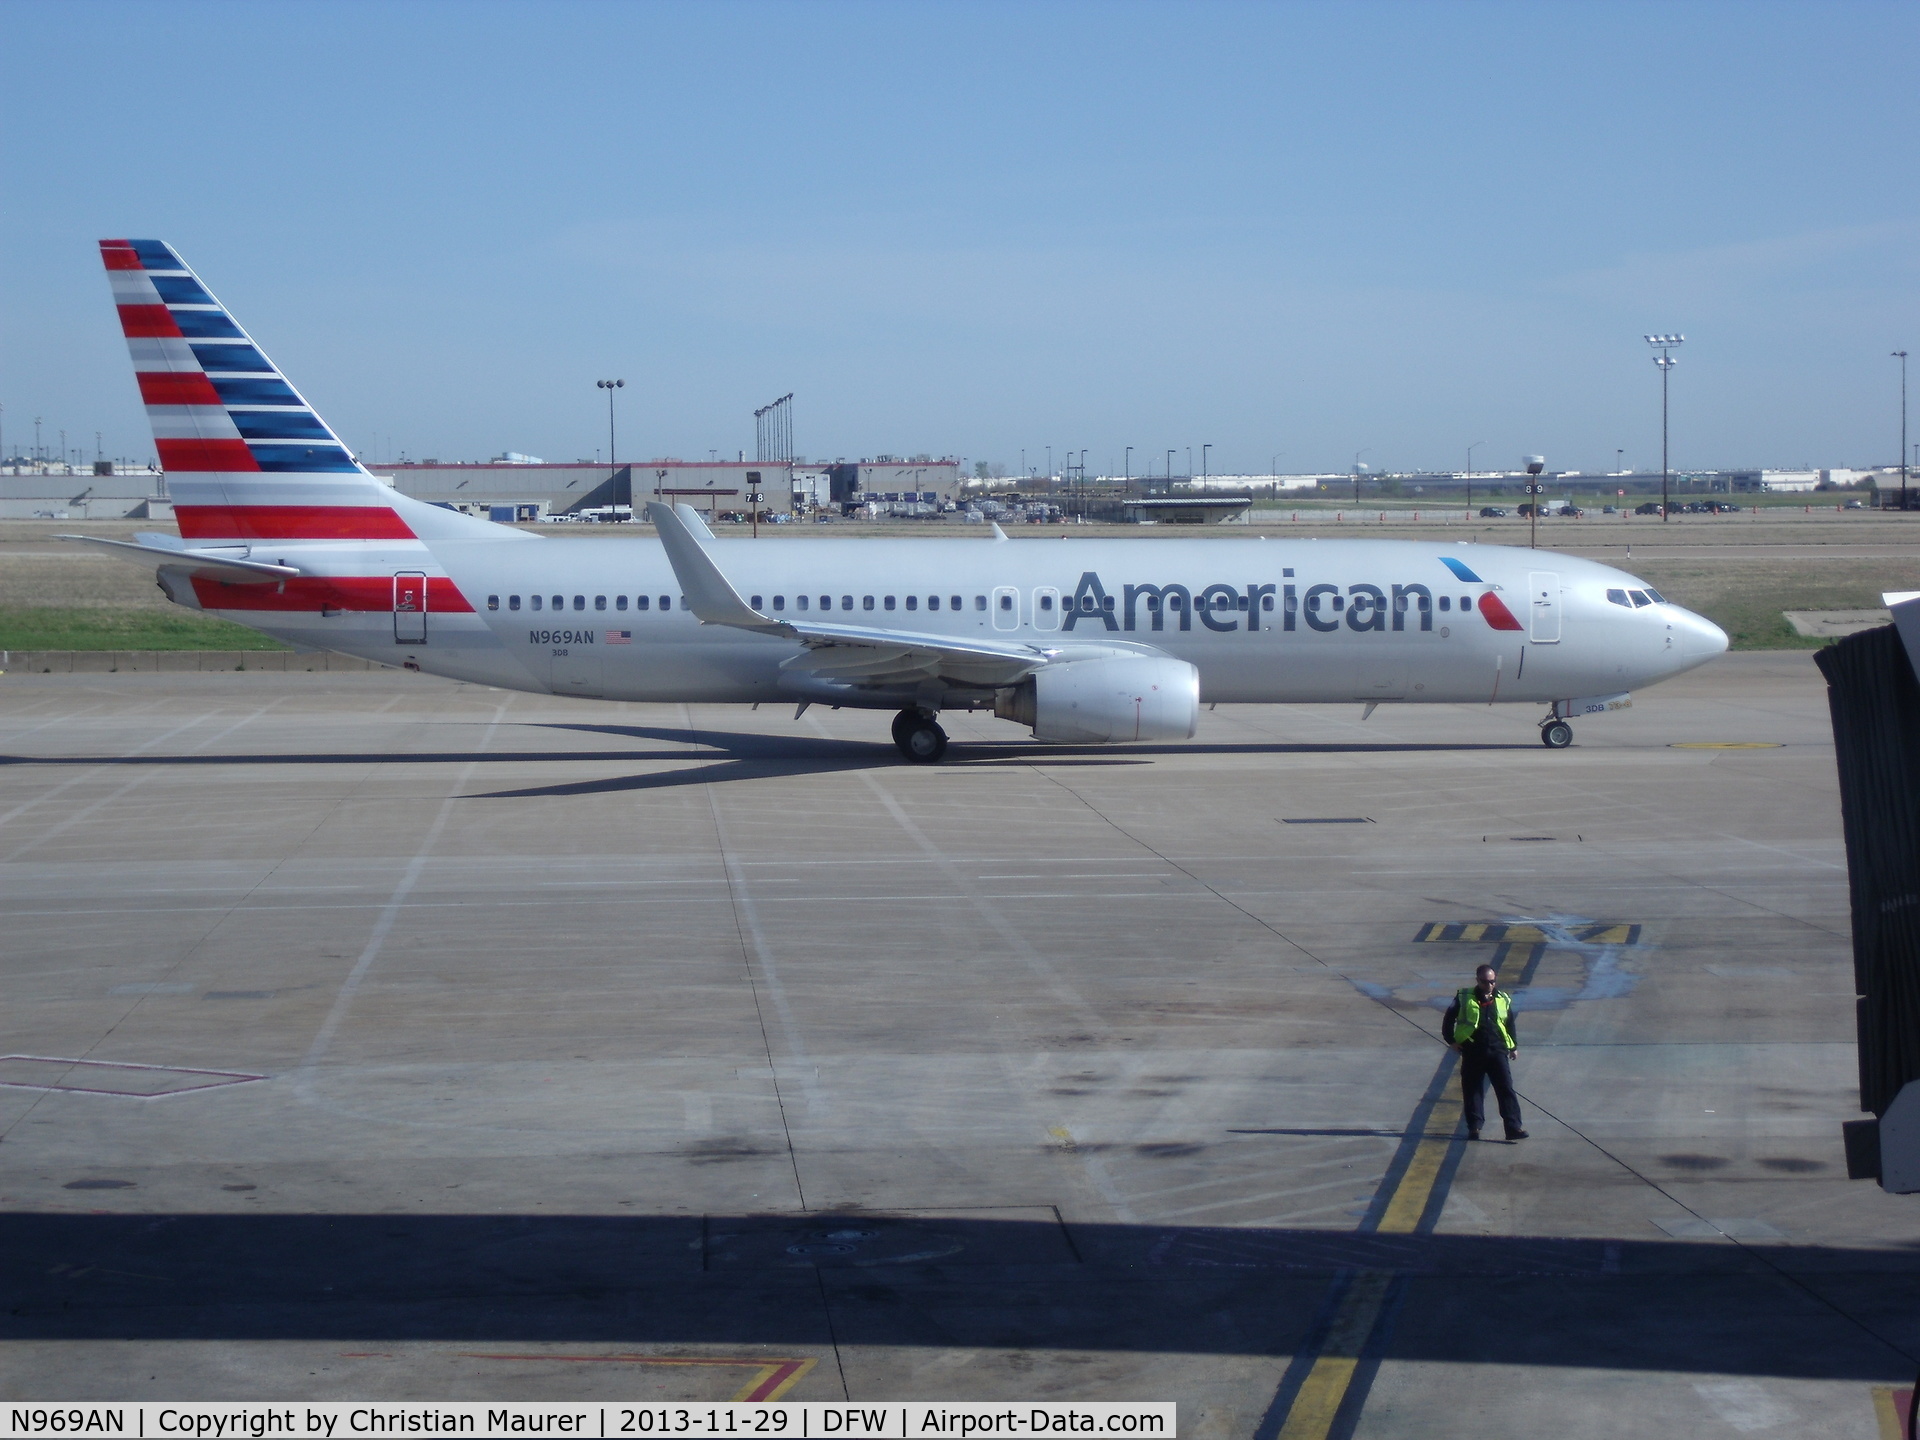 N969AN, 2001 Boeing 737-823 C/N 29546, American Airlines New Livery 738